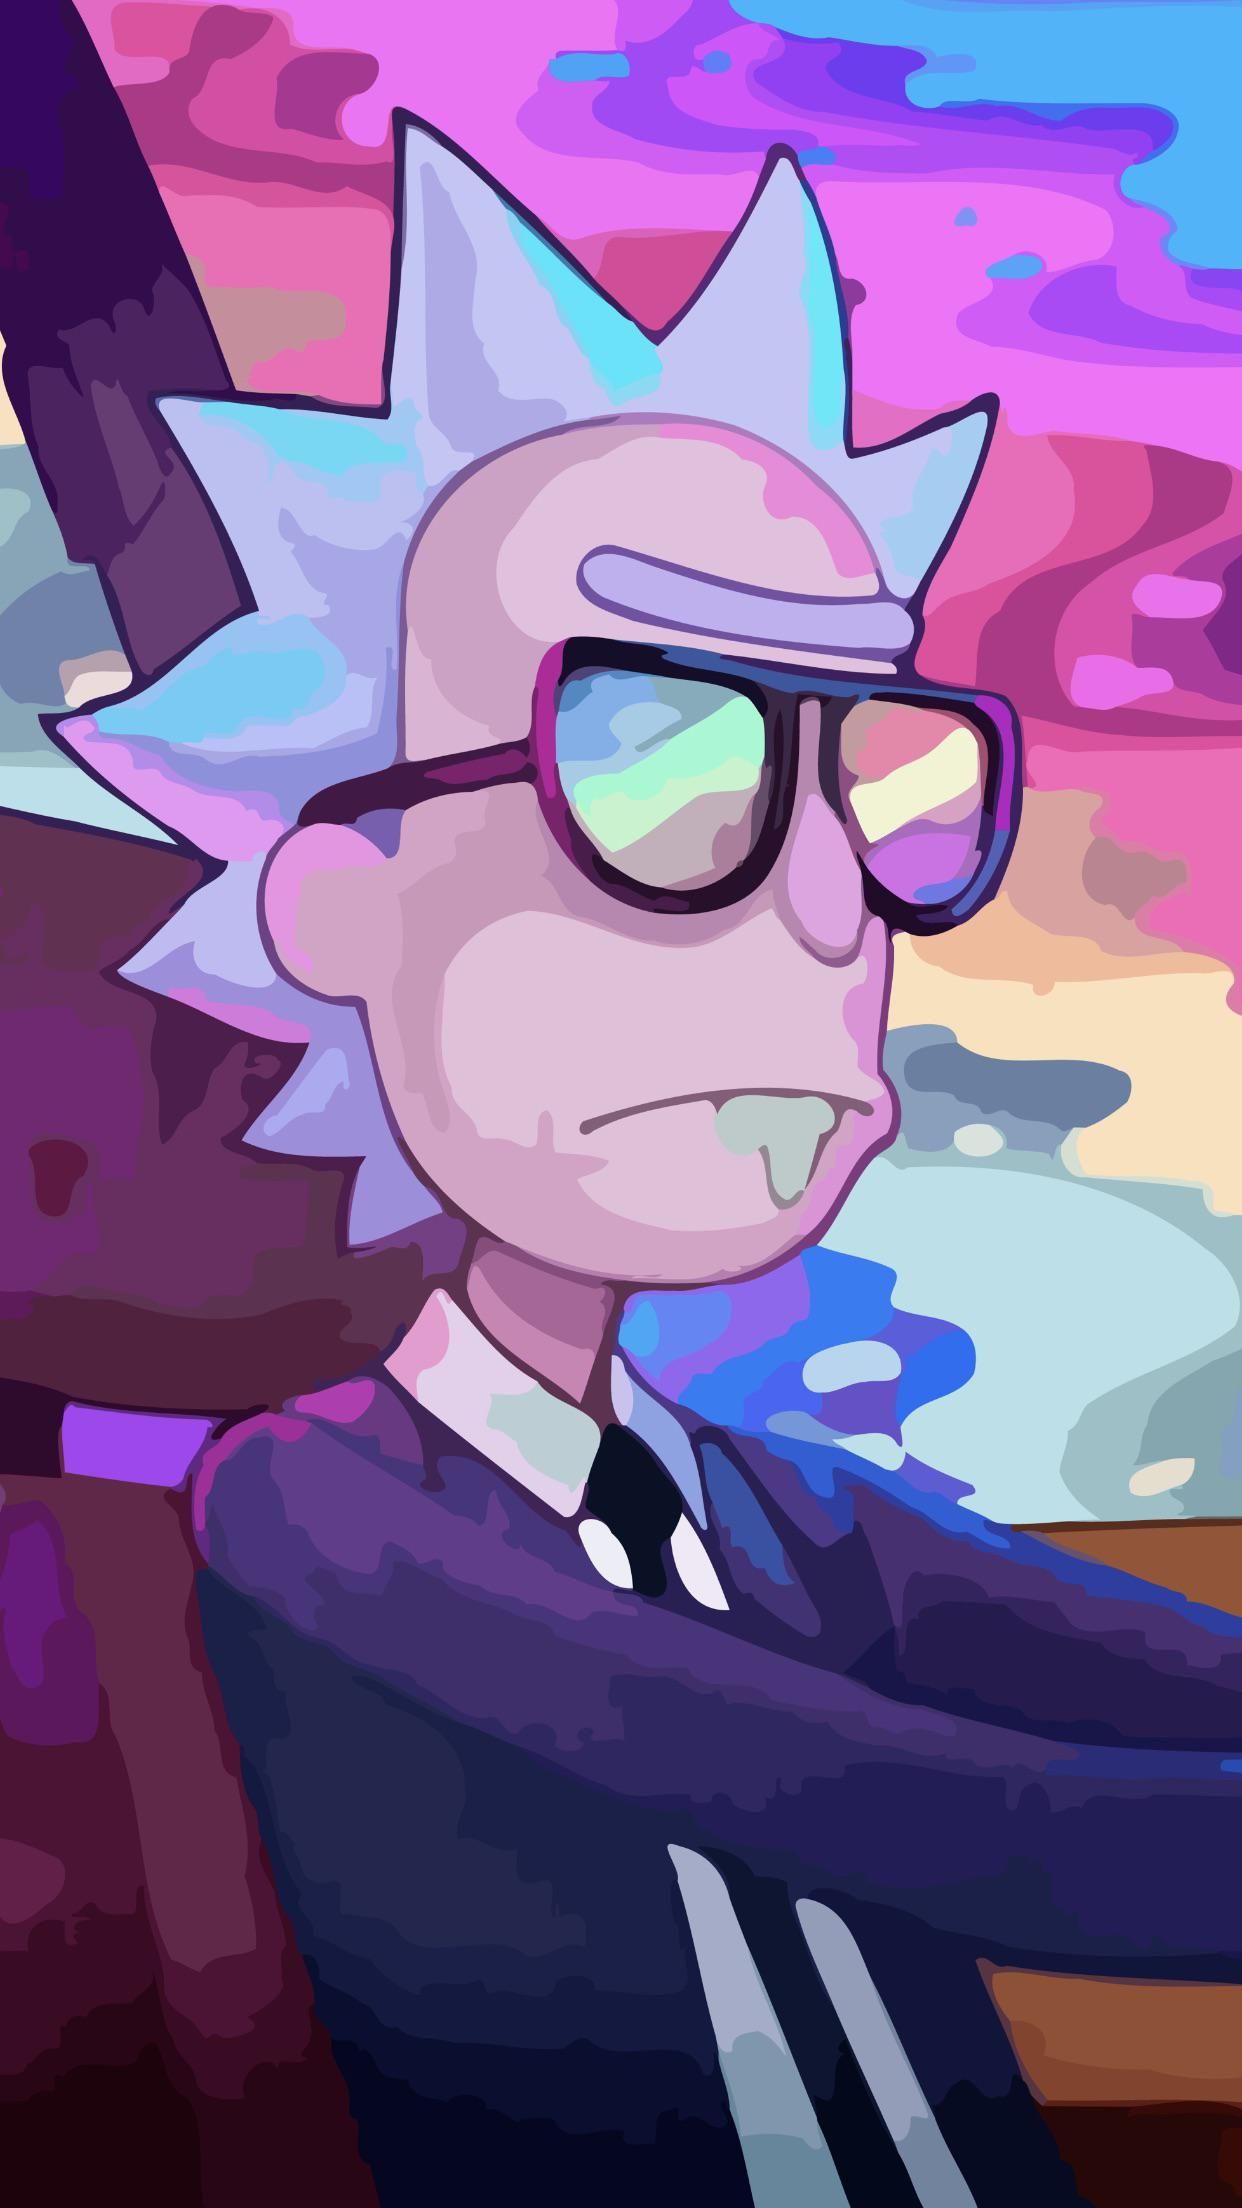 Here Is A Nice Trippy Rick Wallpaper For Mobile Phones Enjoy